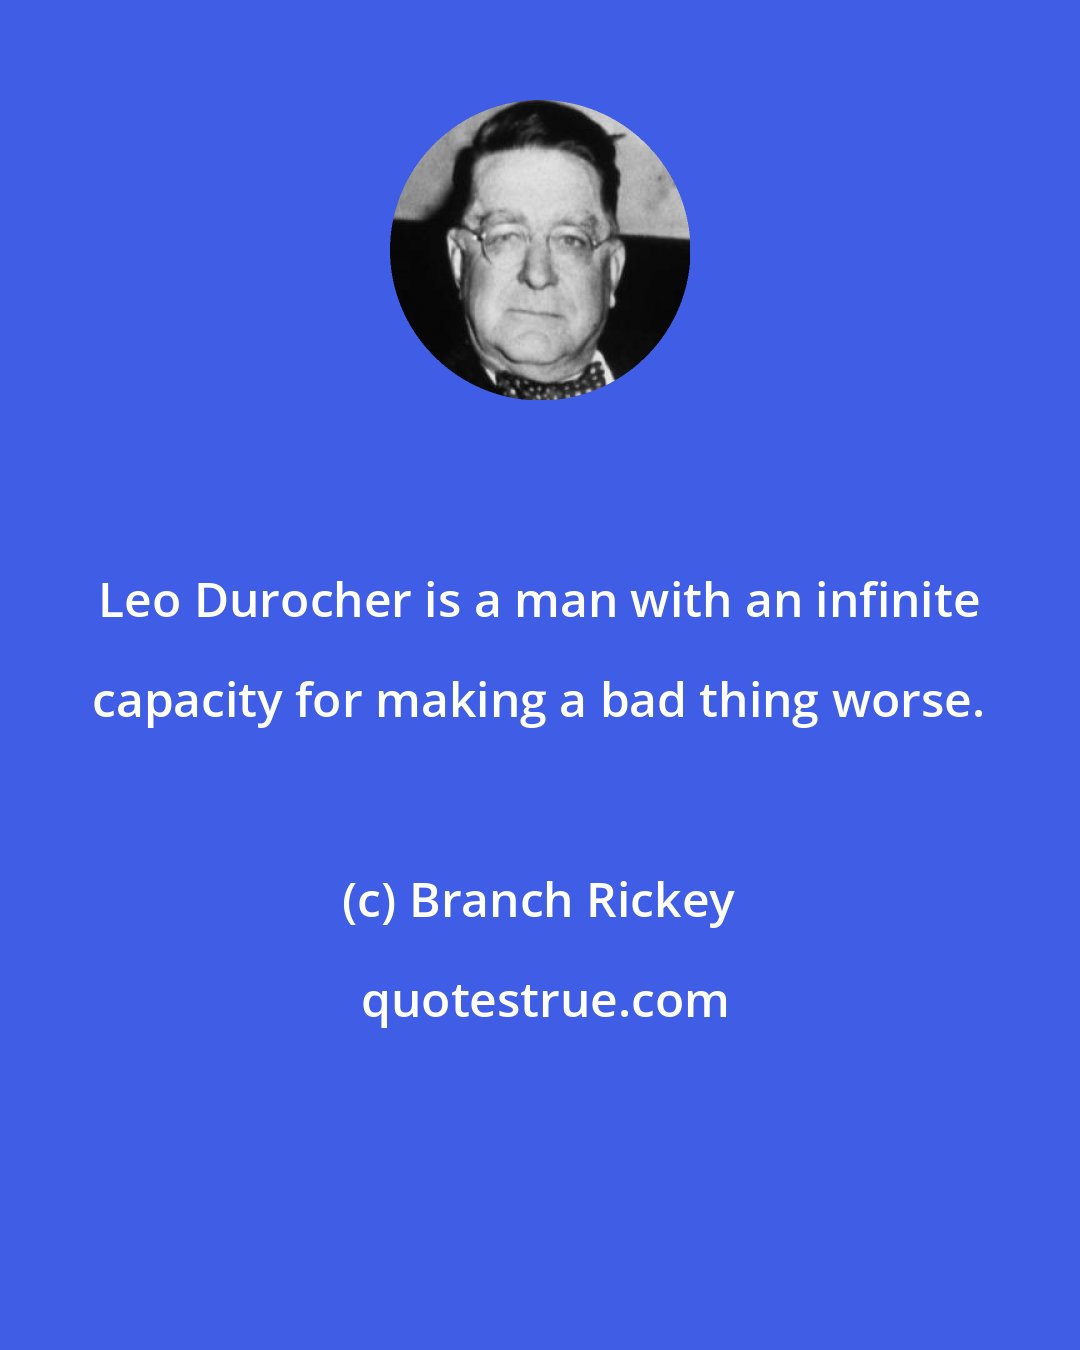 Branch Rickey: Leo Durocher is a man with an infinite capacity for making a bad thing worse.